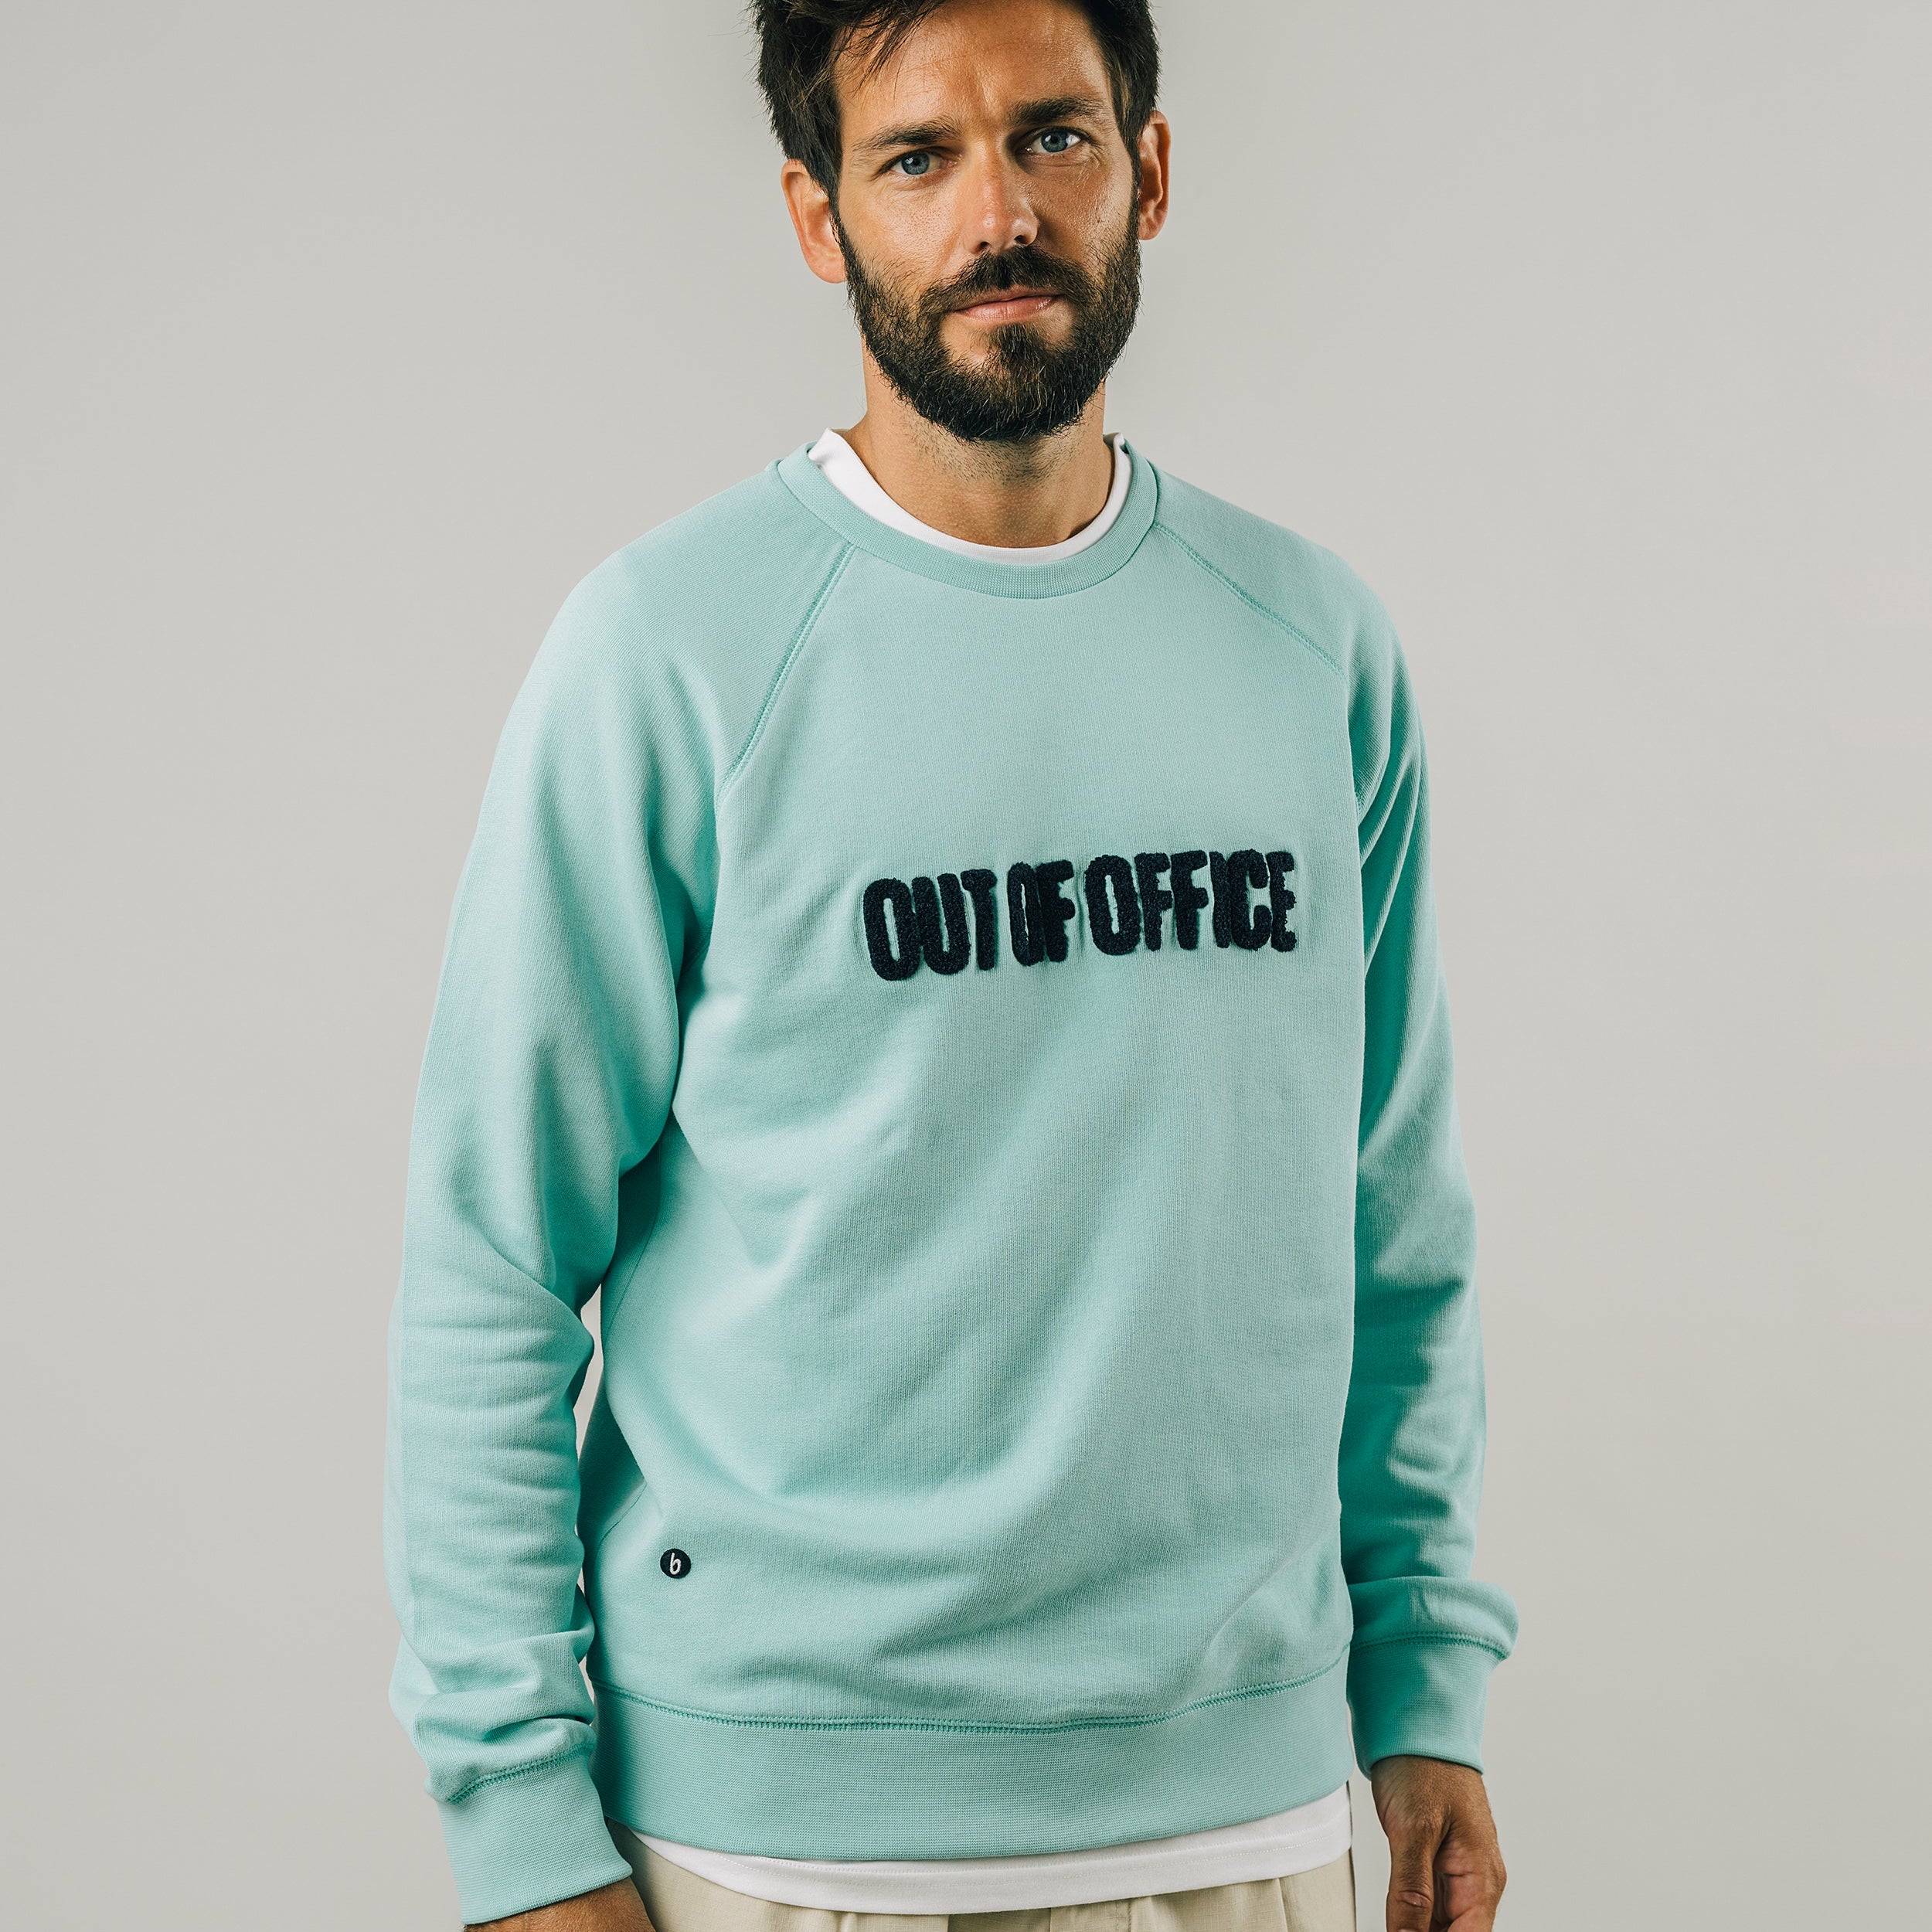 Brava - Out of Office Sweatshirt Pool - The Good Chic